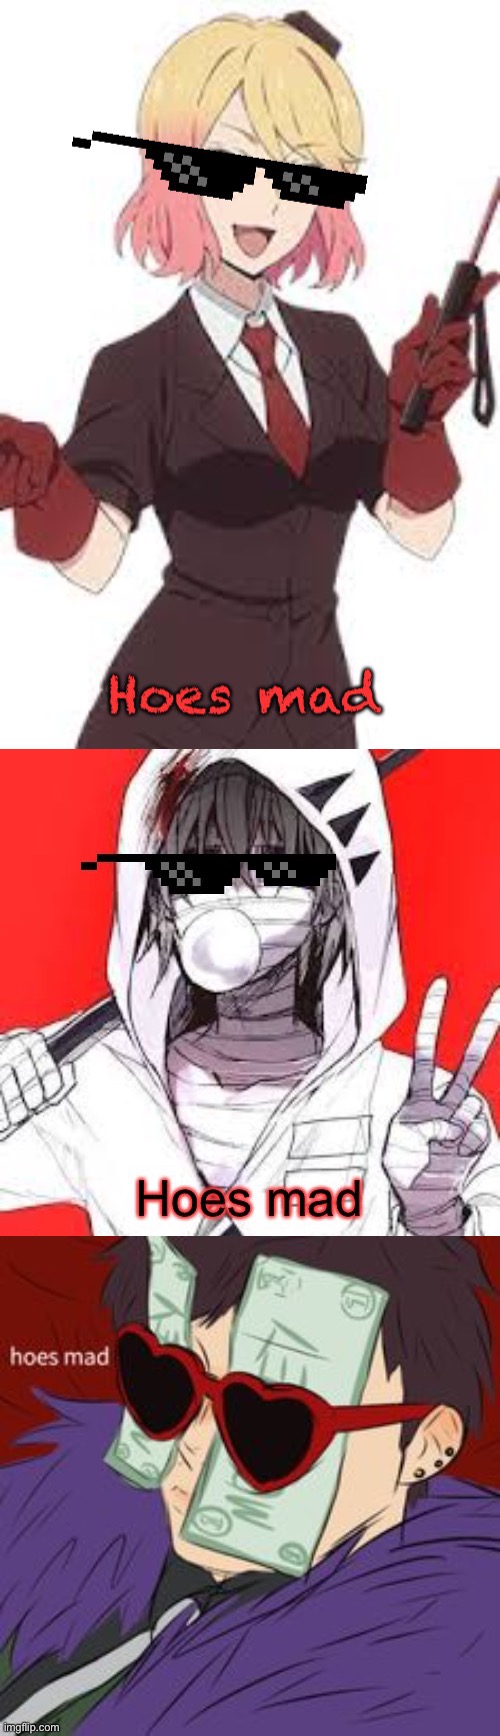 image tagged in cathy hoes mad,zack hoes mad,hoes mad but it's the gucci version | made w/ Imgflip meme maker